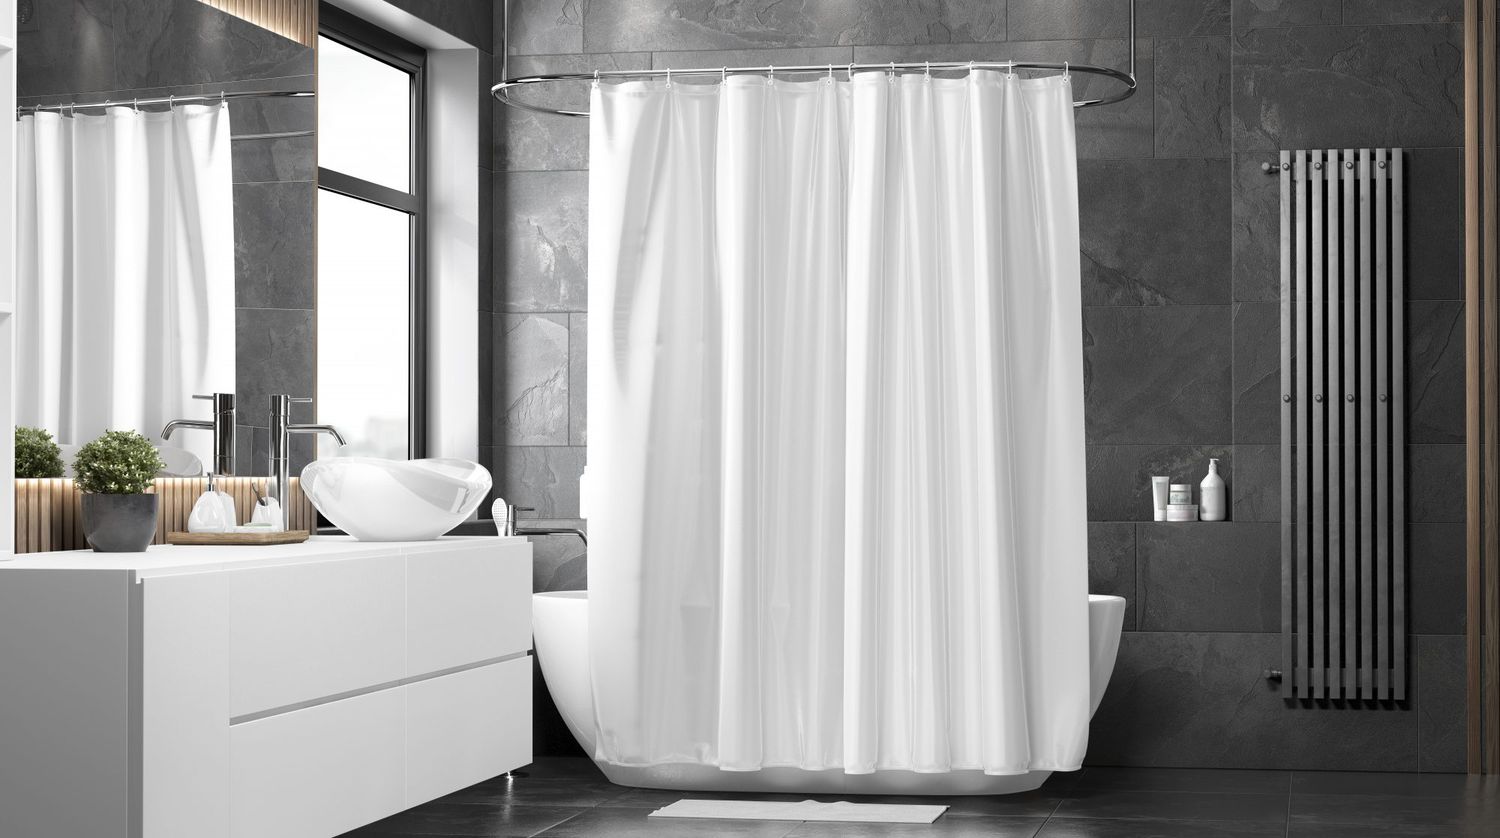 How To Clean Shower Curtains And Liners So They Sparkle Like New